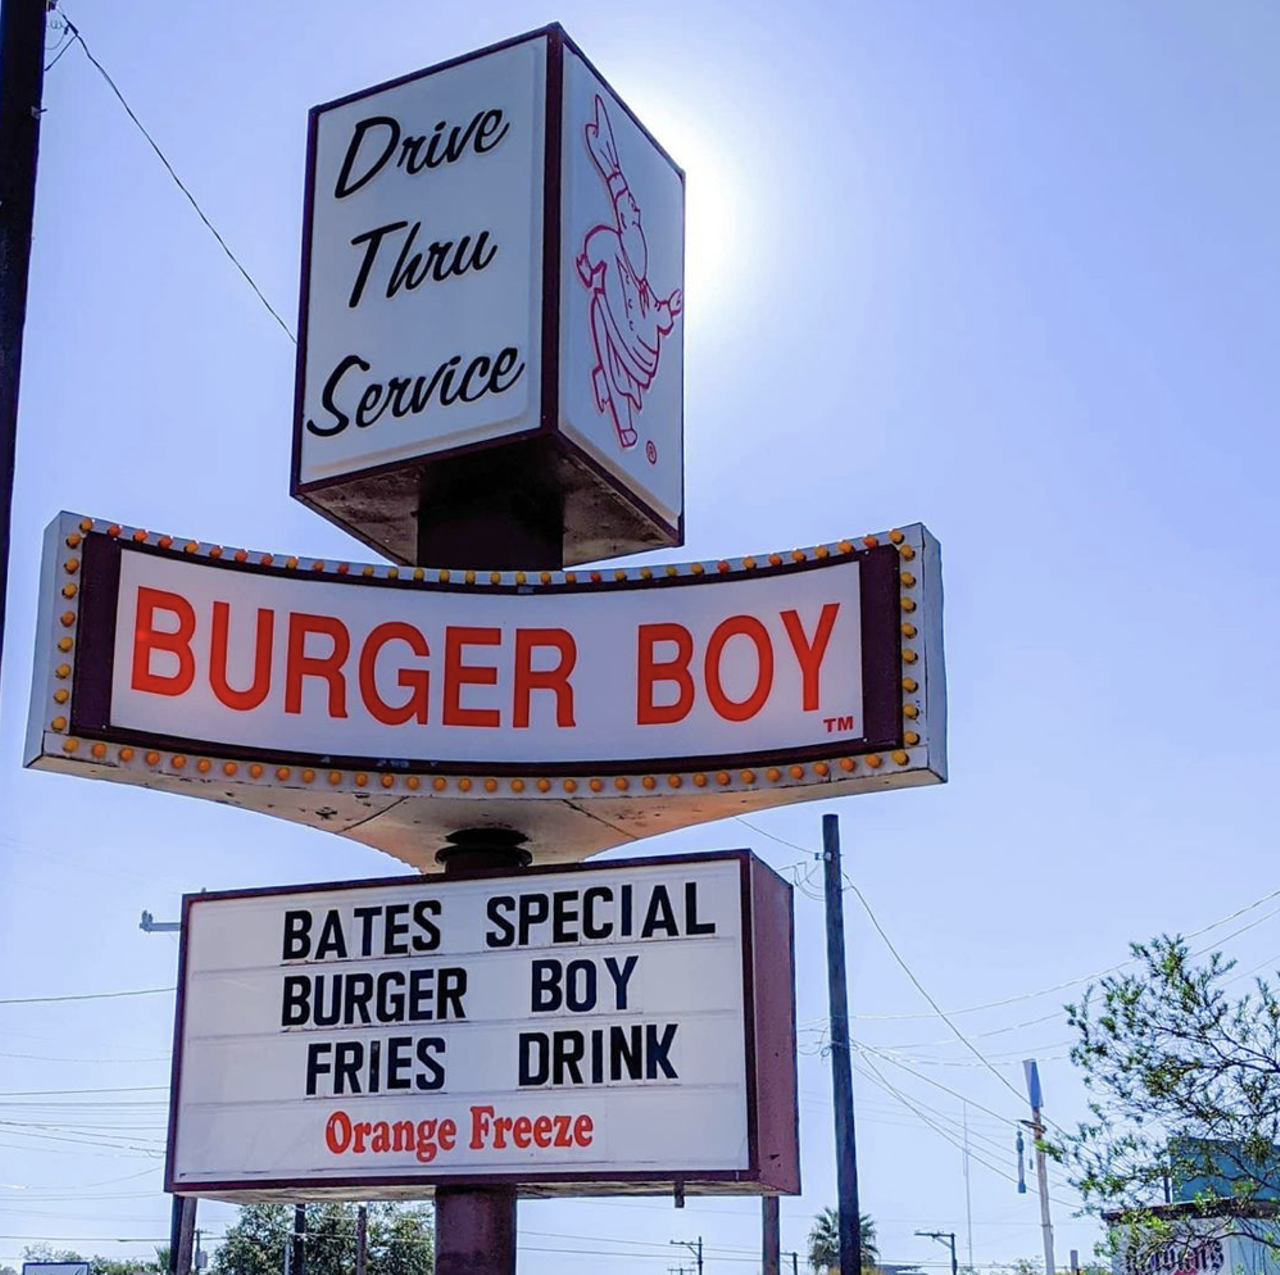 Burger Boy – South and Live Oak
burgerboysa.com
This spot, known for old-fashioned burgers and thick shakes, has plans for two more locations, including one on South New Braunfels and one near Live Oak. 
Photo via Instagram / burgerboysa